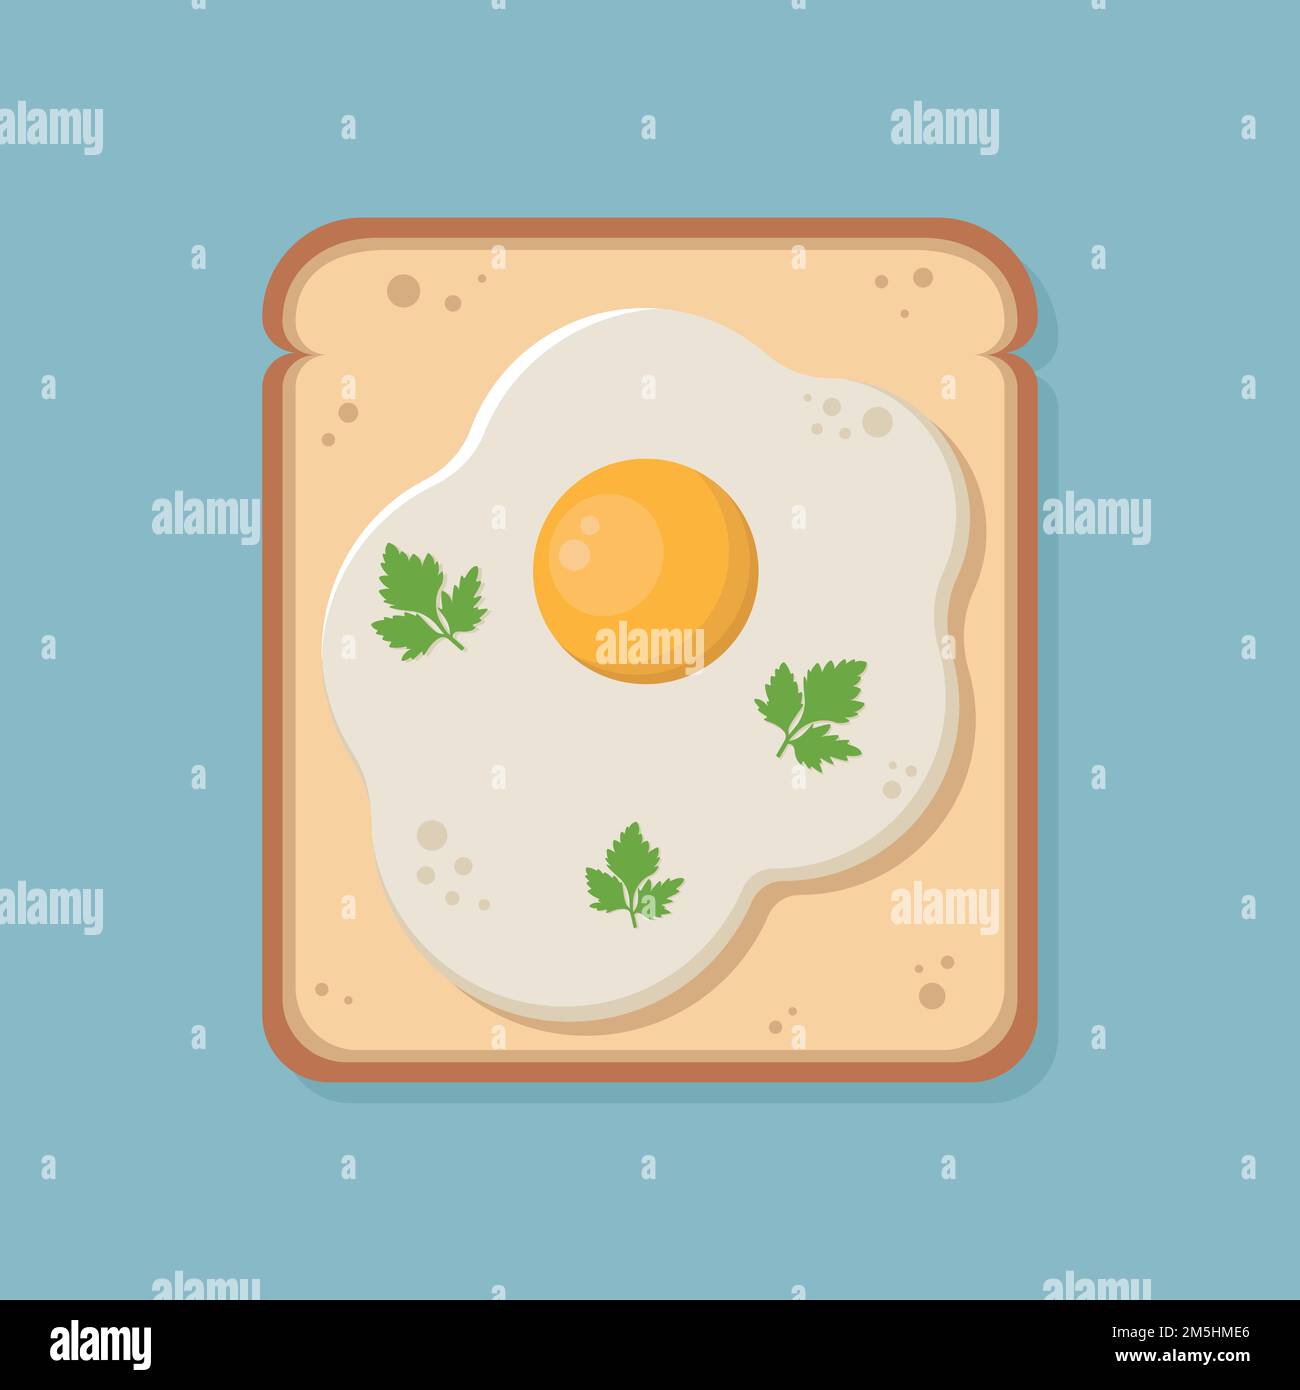 Sandwich with Fried egg. Toast with scrambled eggs on slice of bread. Healthy breakfast. Omelet. Vector illustration in flat style. Stock Vector